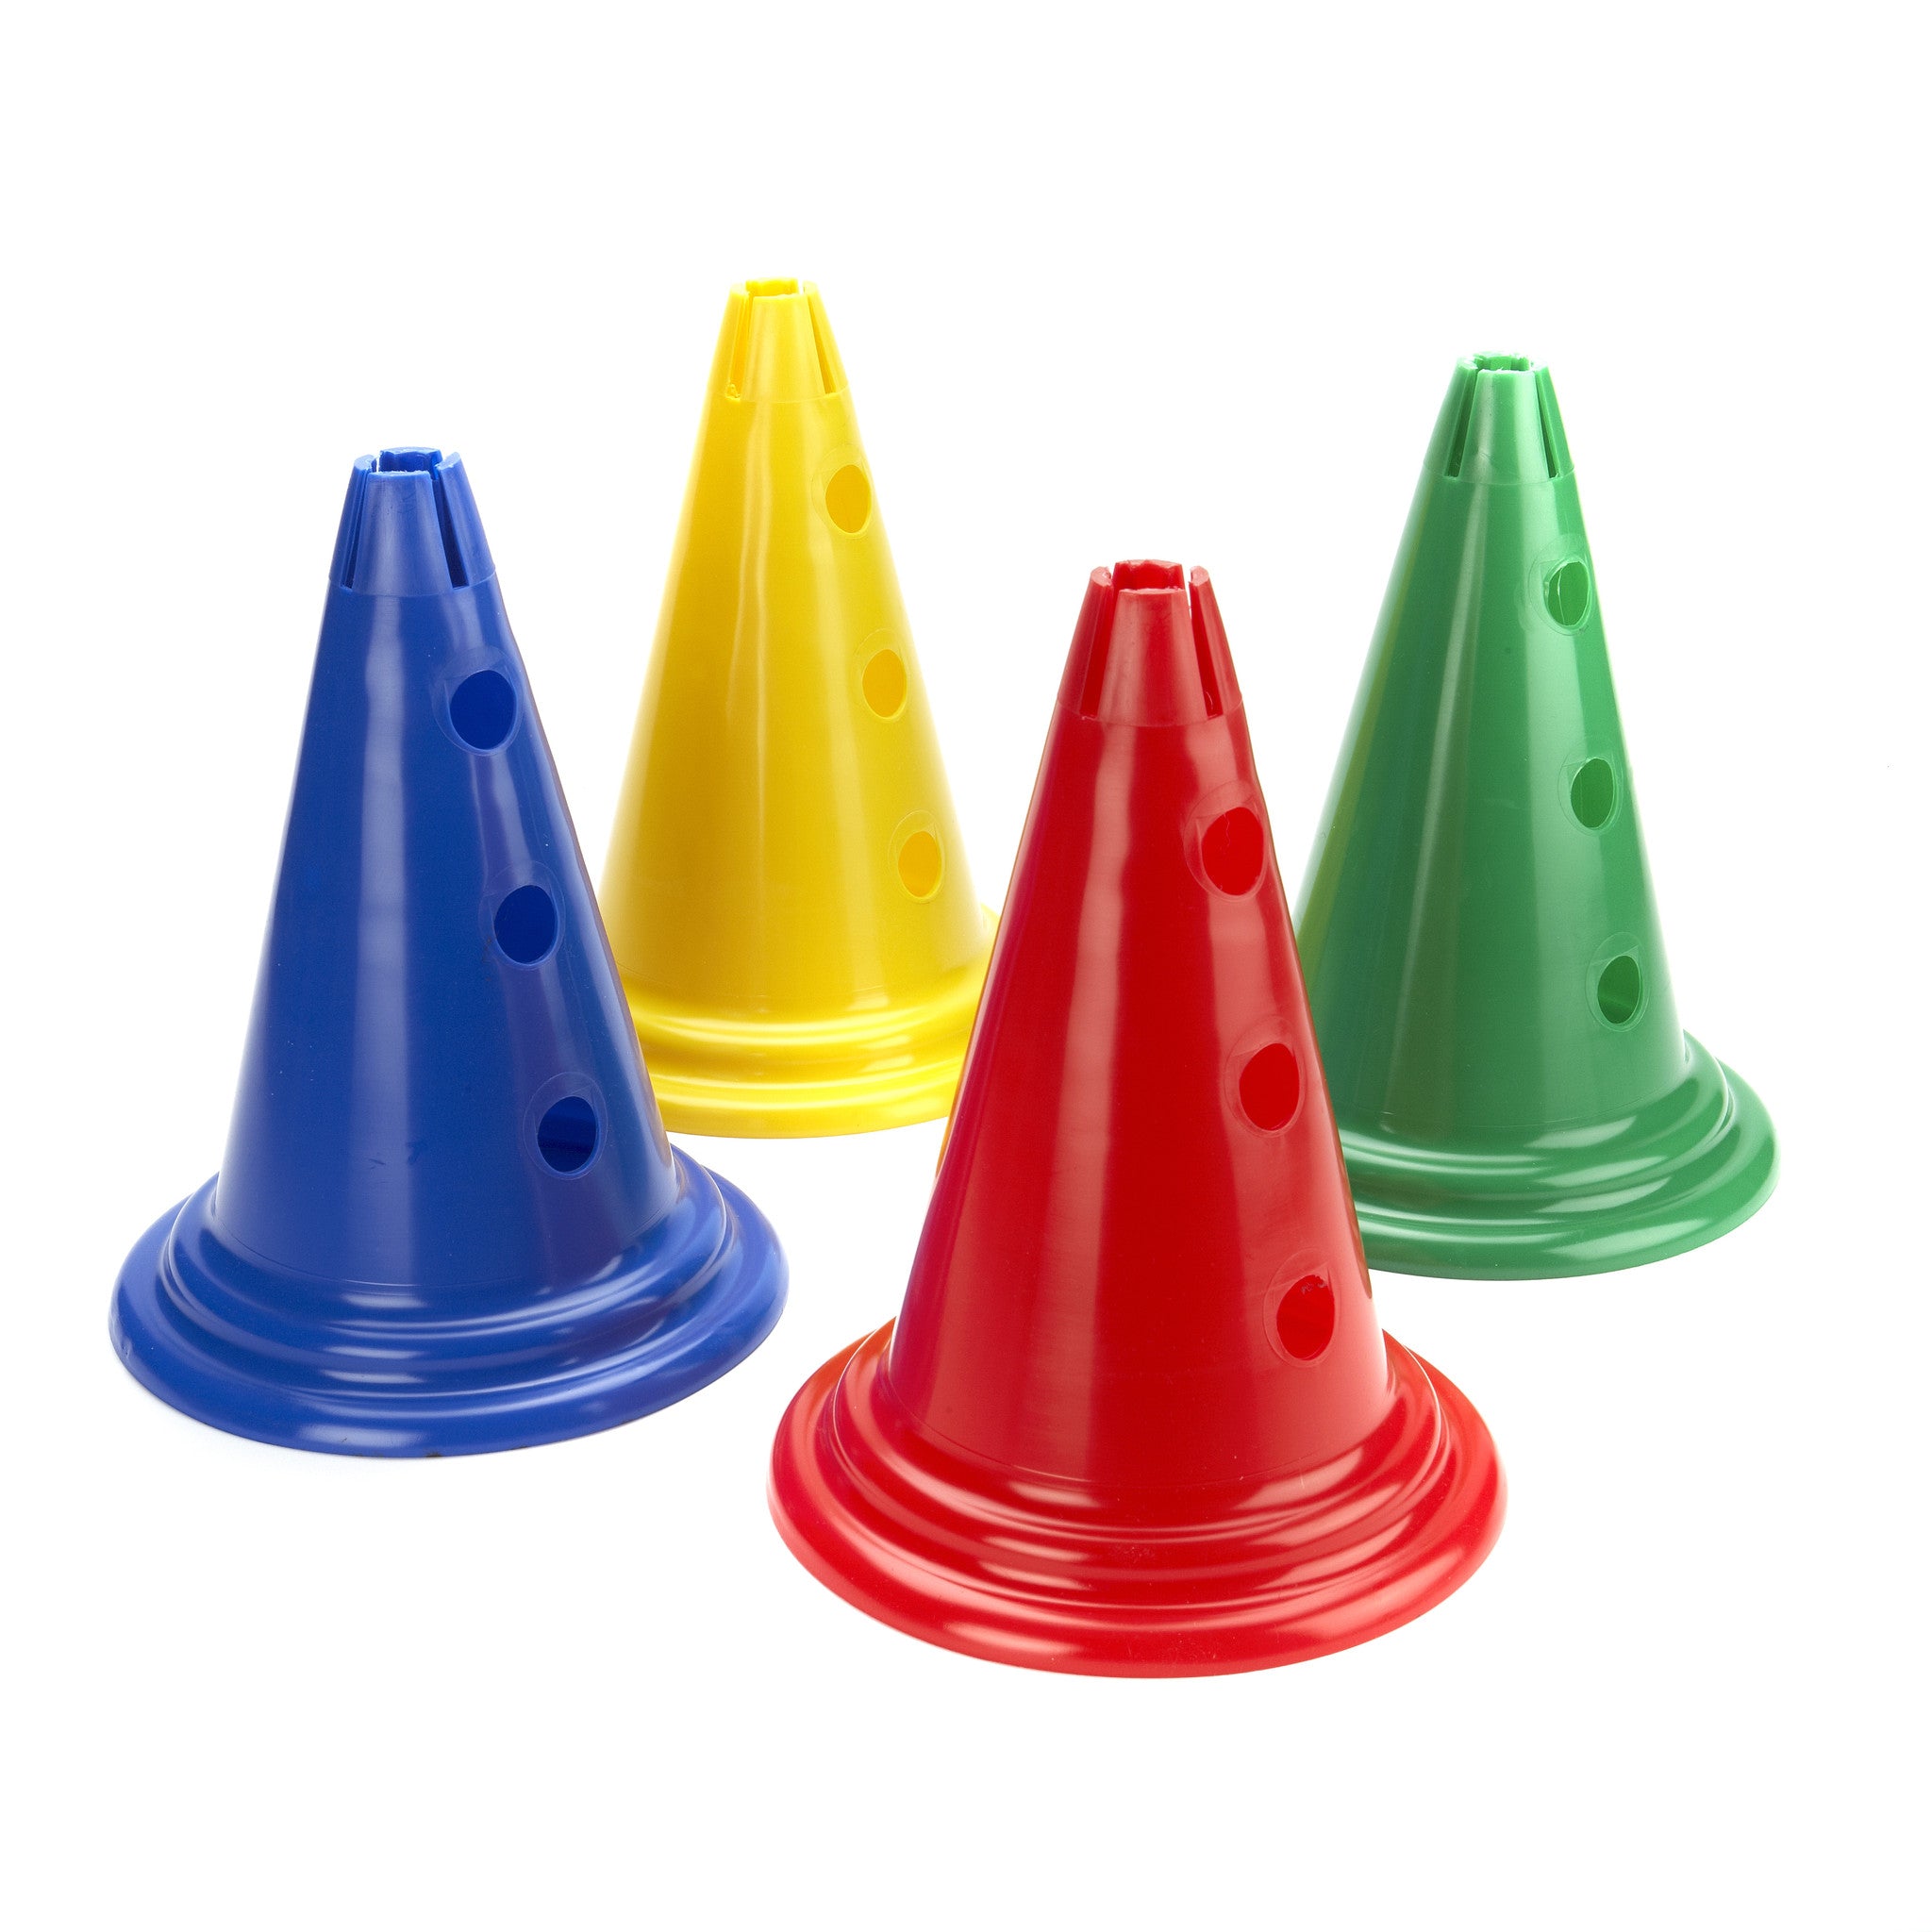 Four small sports cone markers. Use with poles to create hurdles.